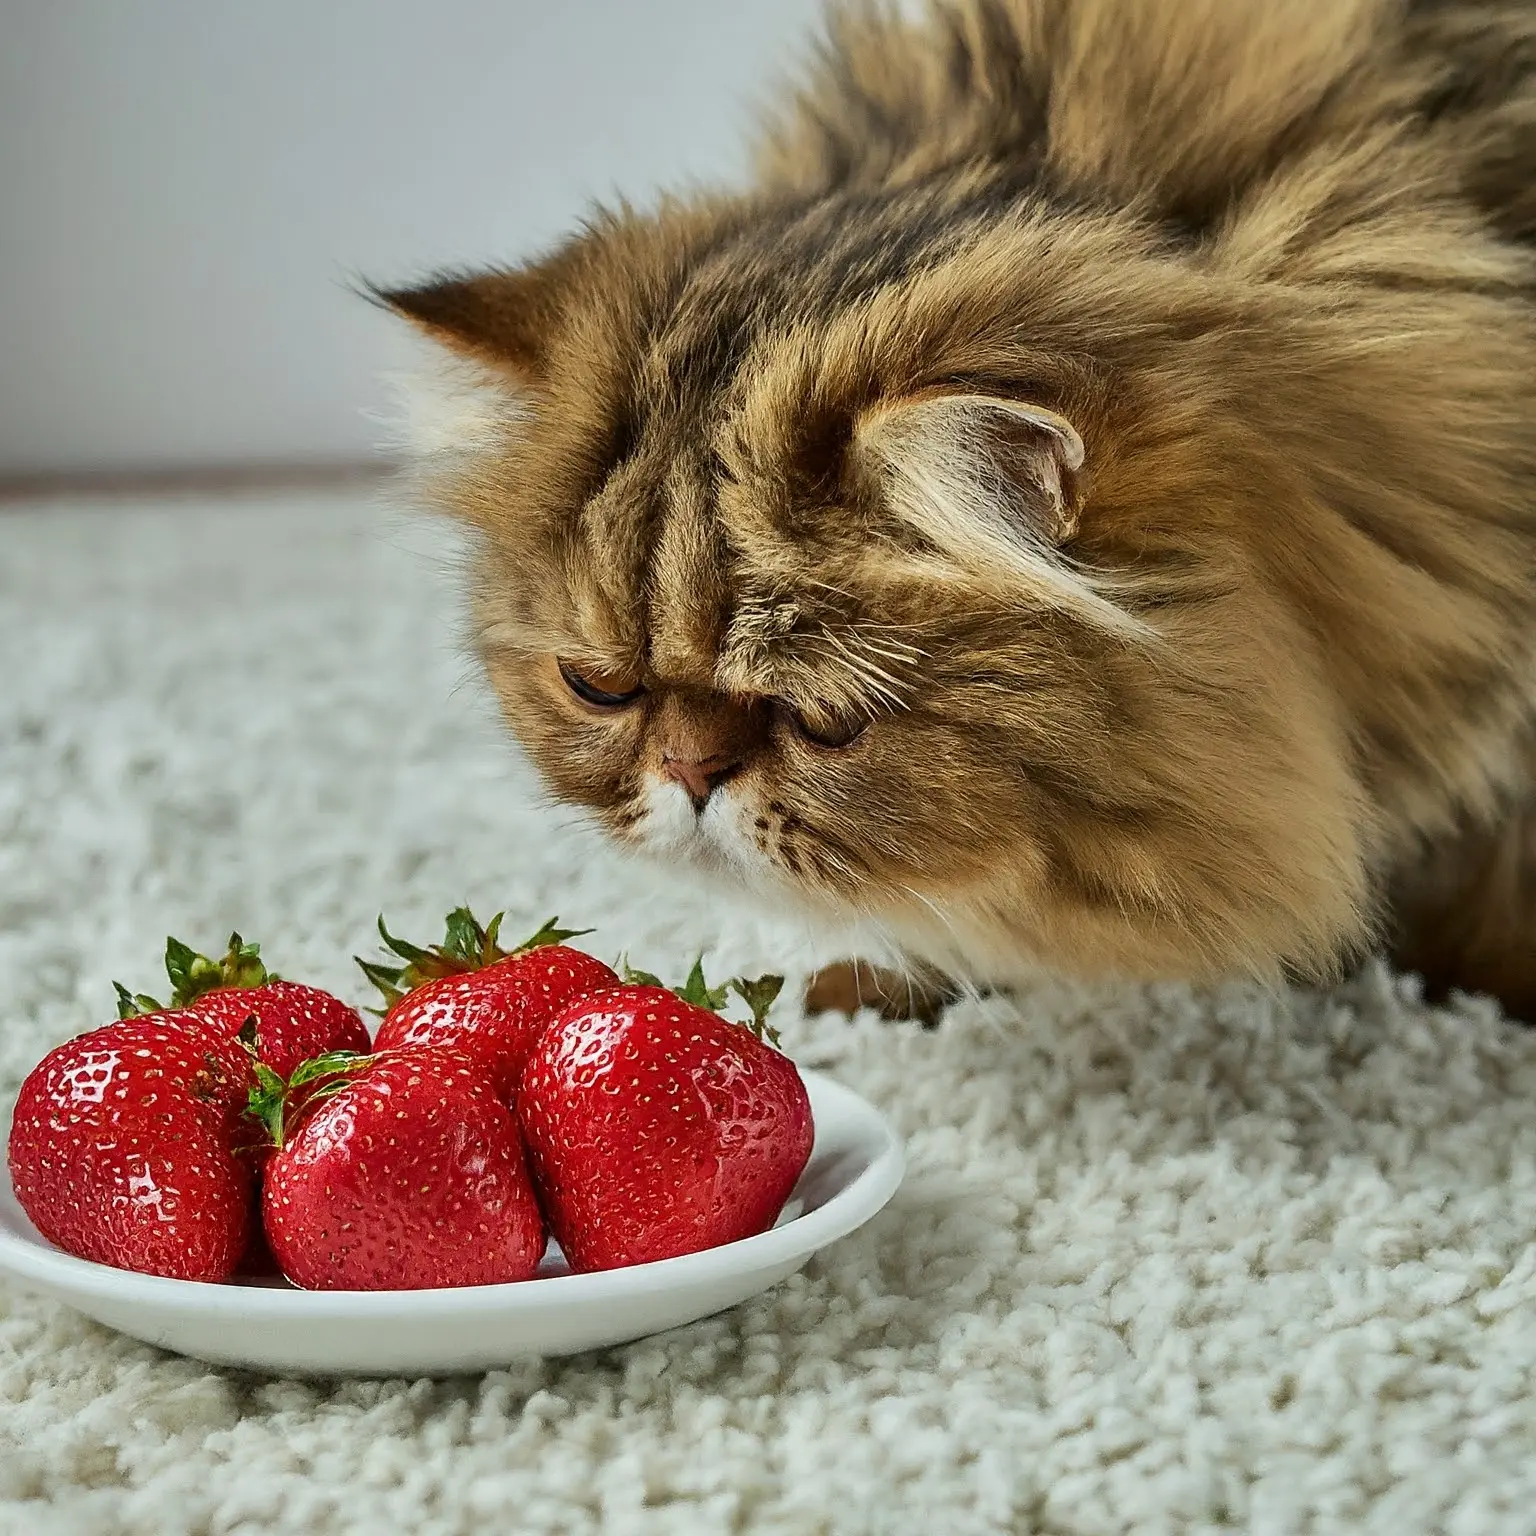 can Persian cats eat strawberries